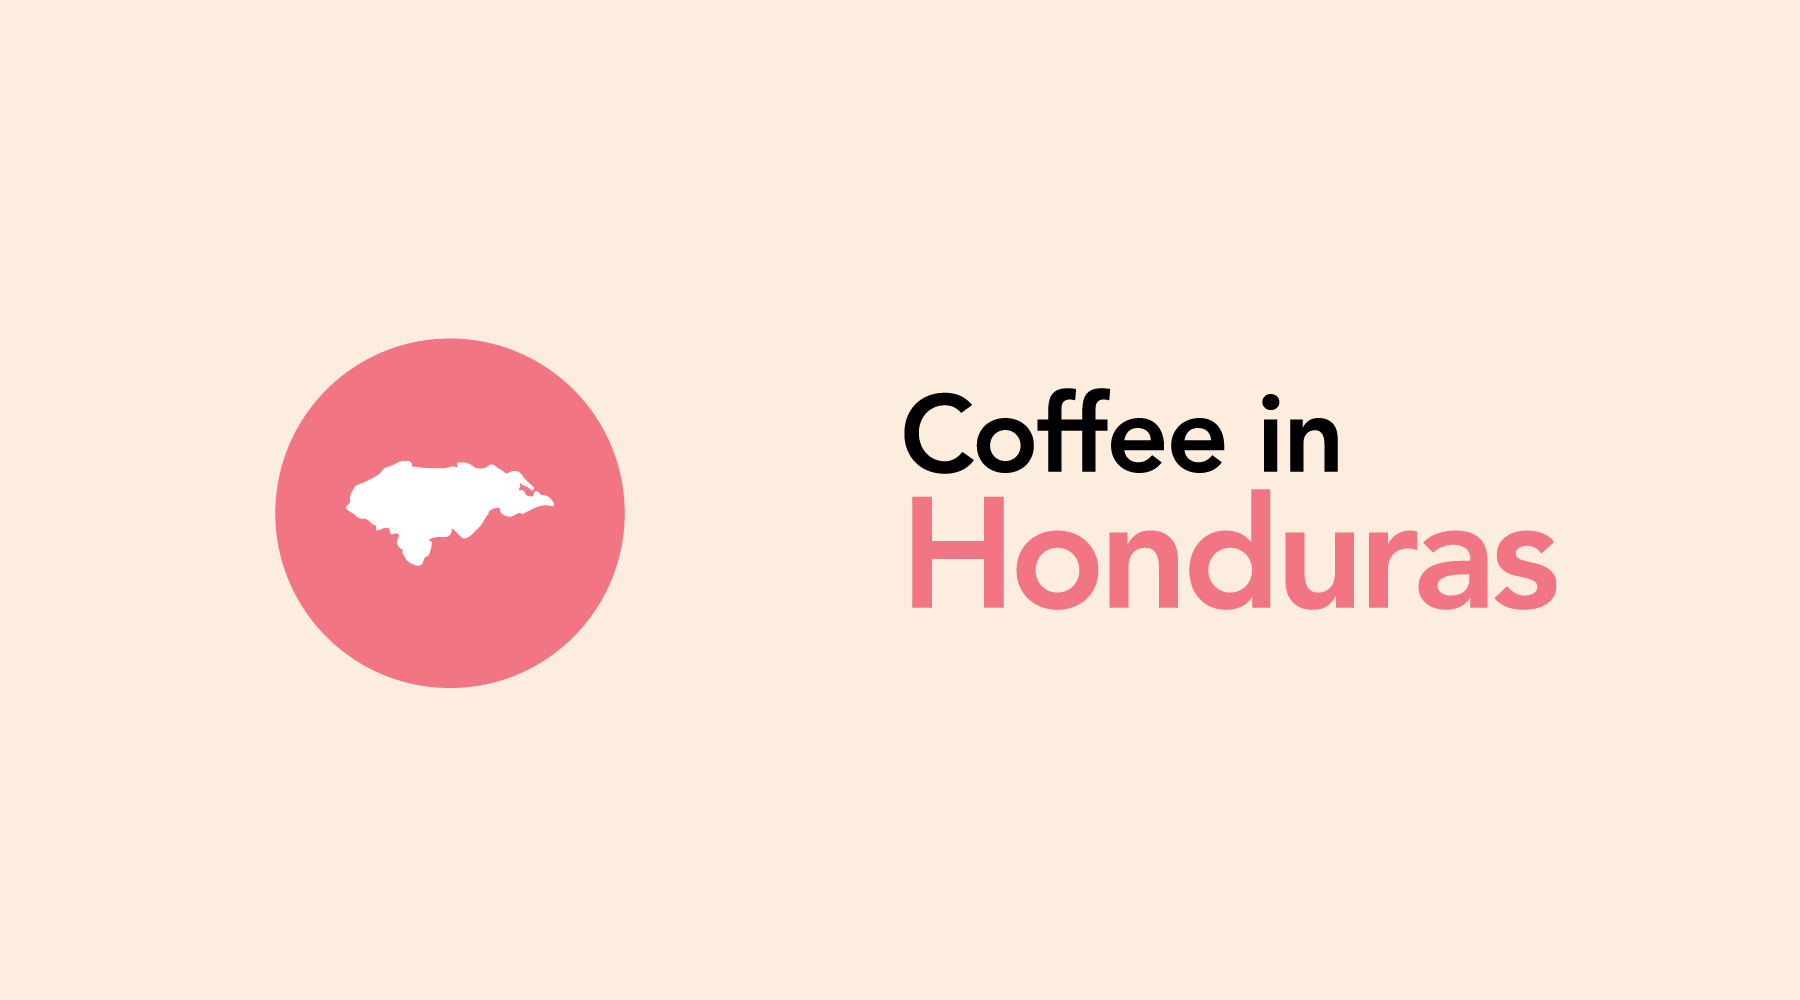 Peach graphic with "Coffee in Honduras" in pink and black text.